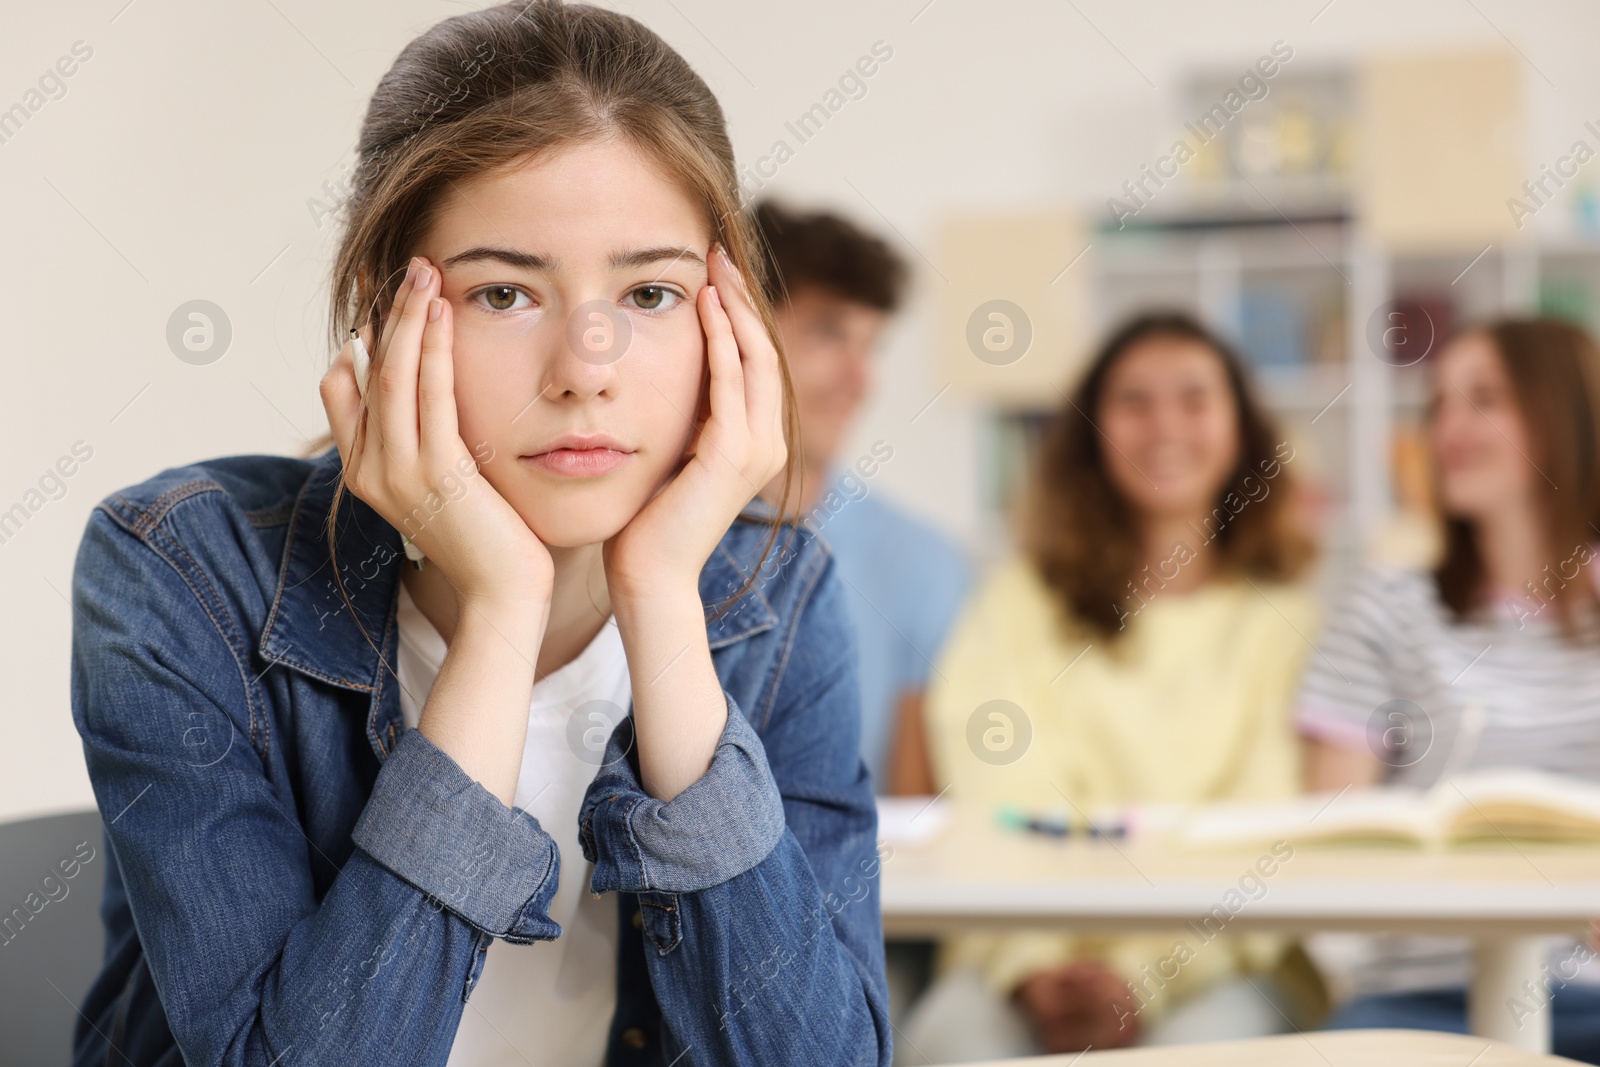 Photo of Teen problems. Lonely girl sitting separately from other students in classroom